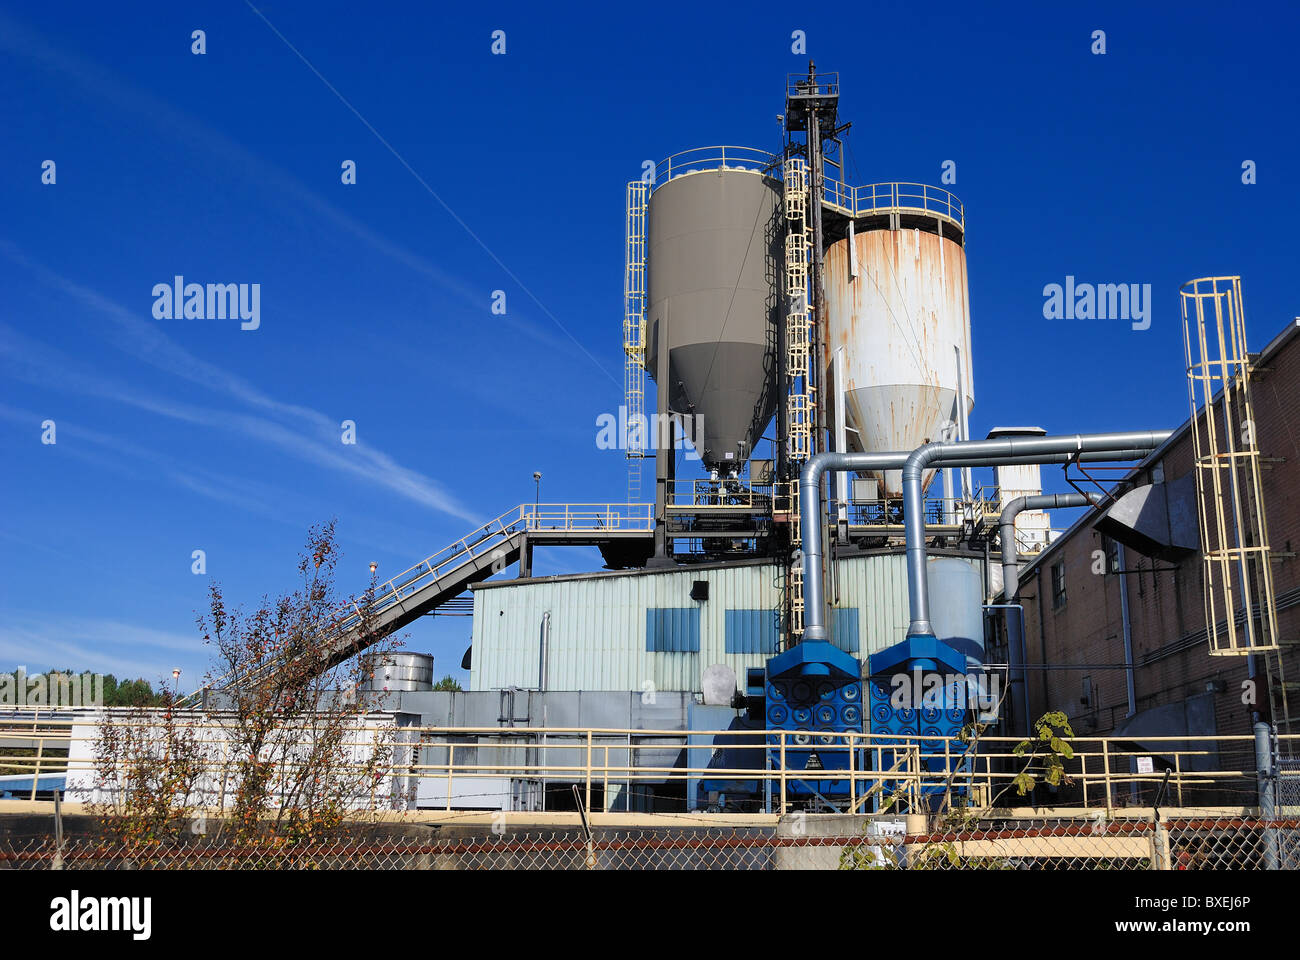 An industrial rubber processing facility. Stock Photo